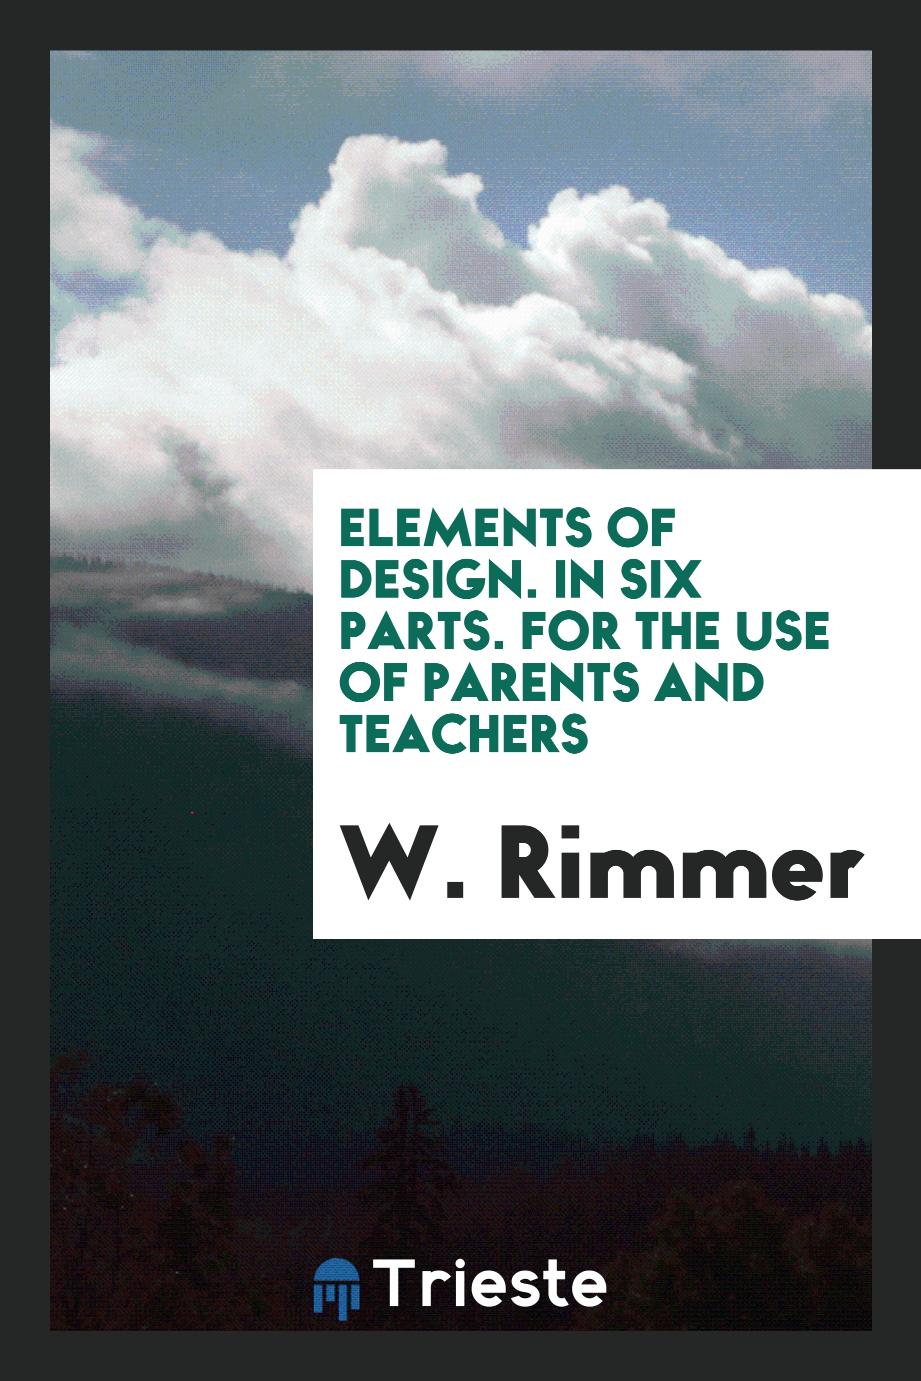 Elements of Design. In Six Parts. For the Use of Parents and Teachers